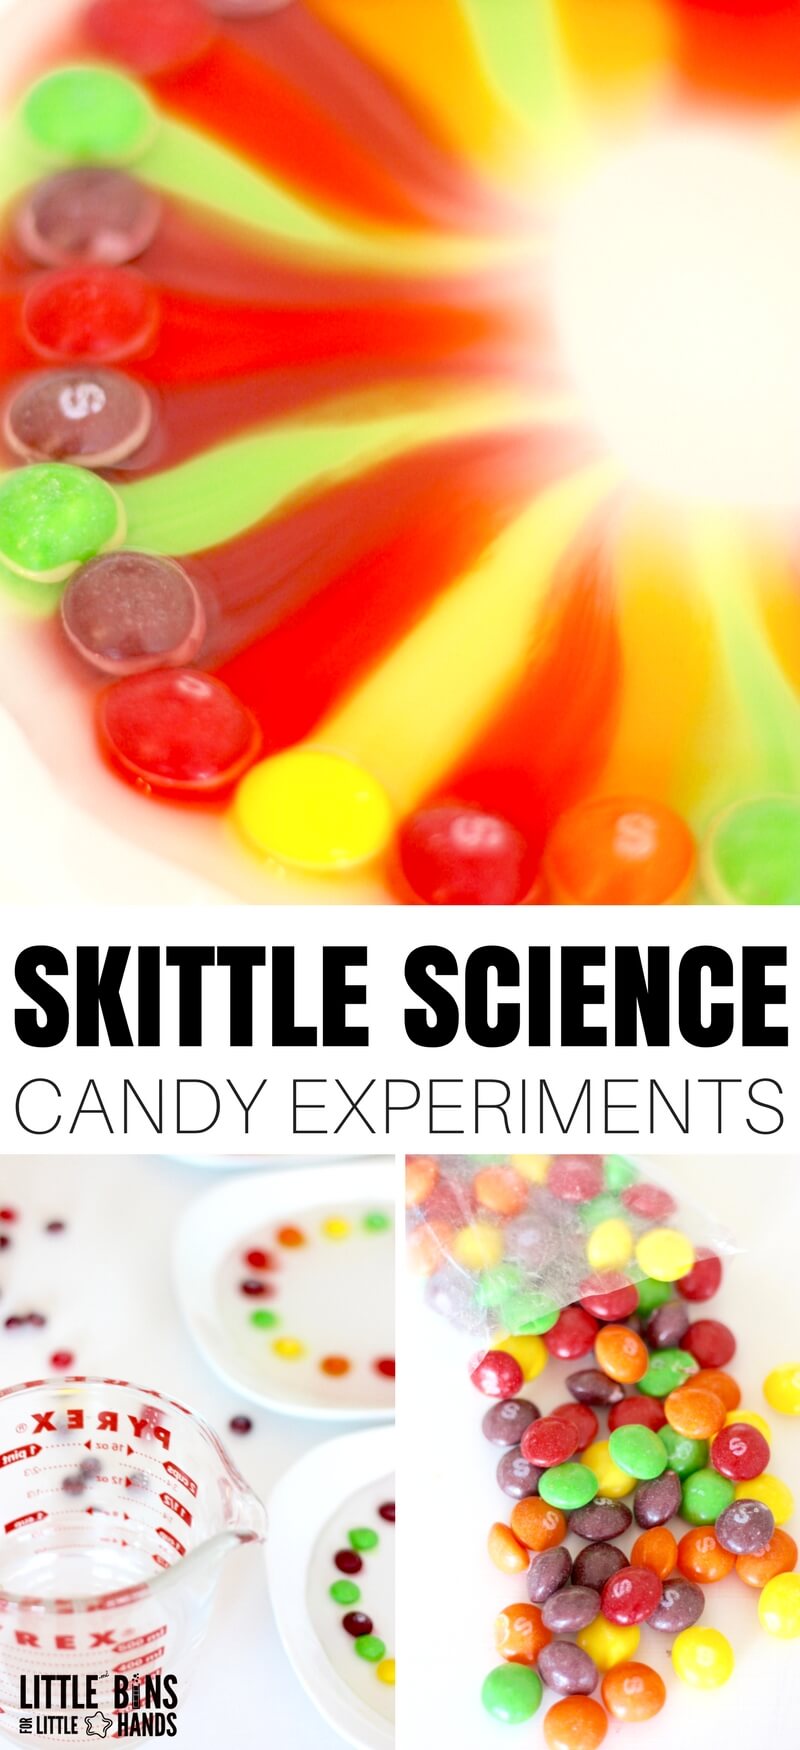 This Skittles science activity is an awesome candy science experiment that is easy to set up for kids! #skittlescience #candyexperiments #STEM